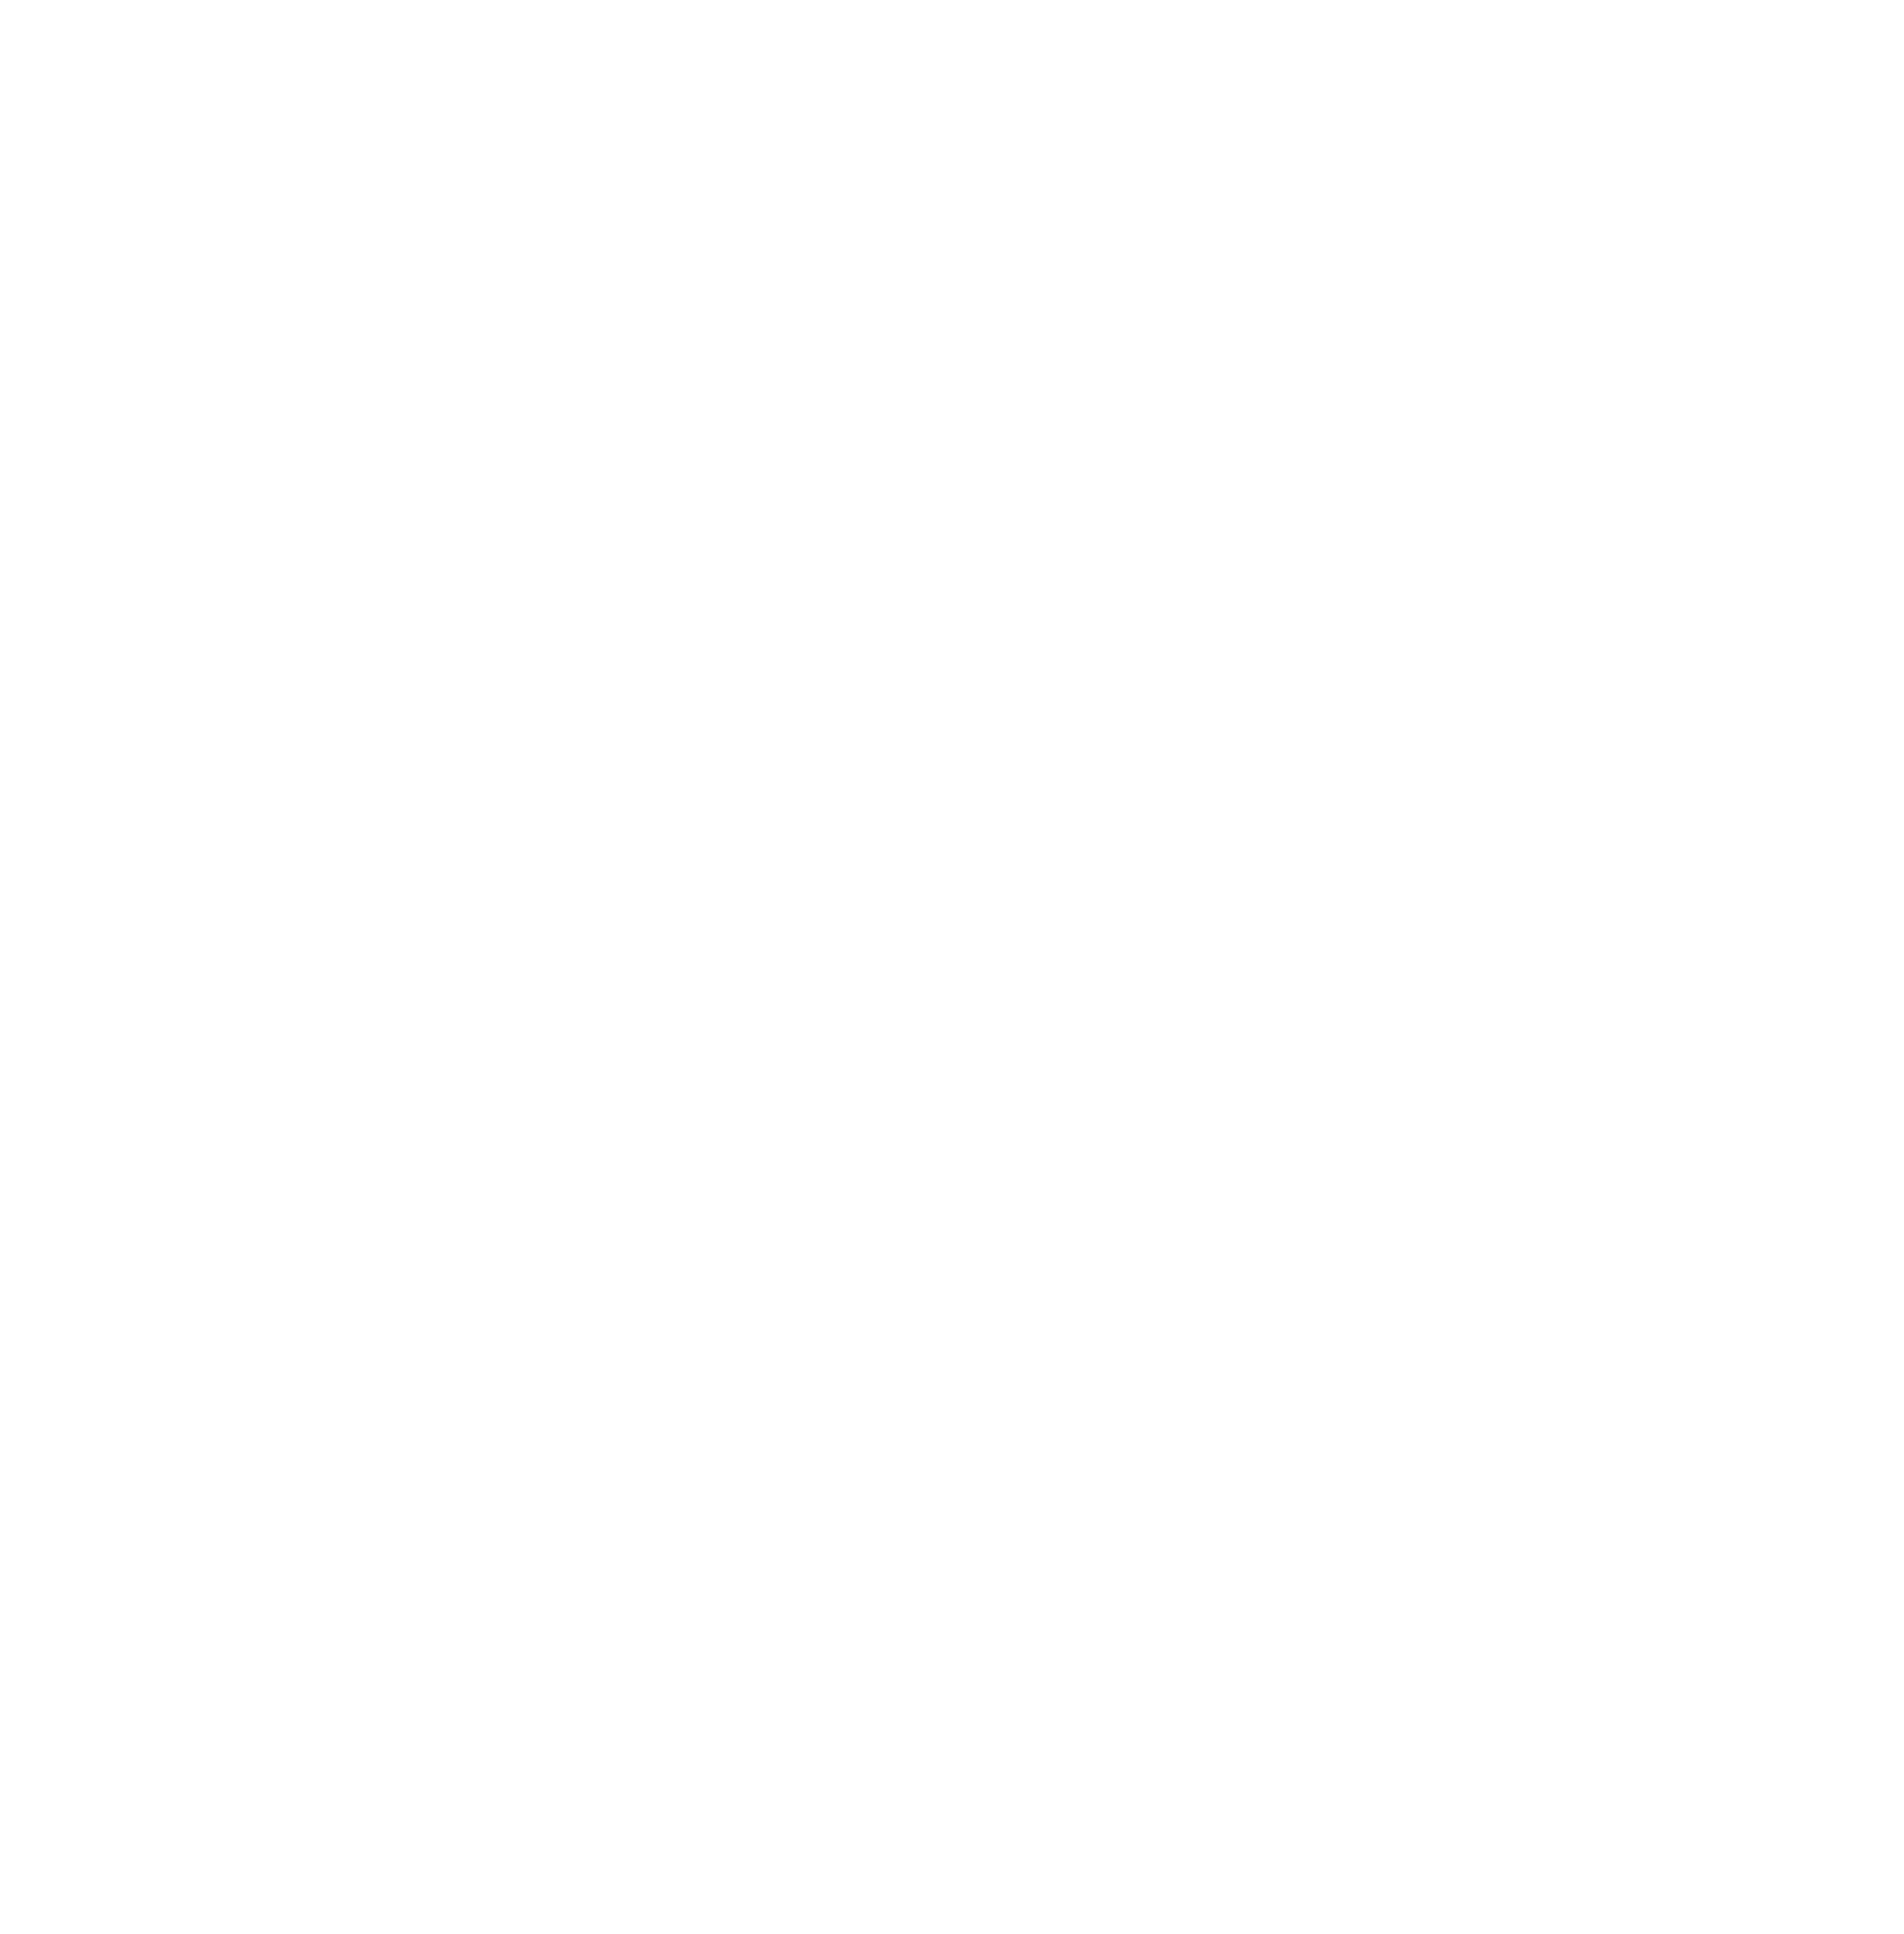 The seal of the U.S. Department of State.